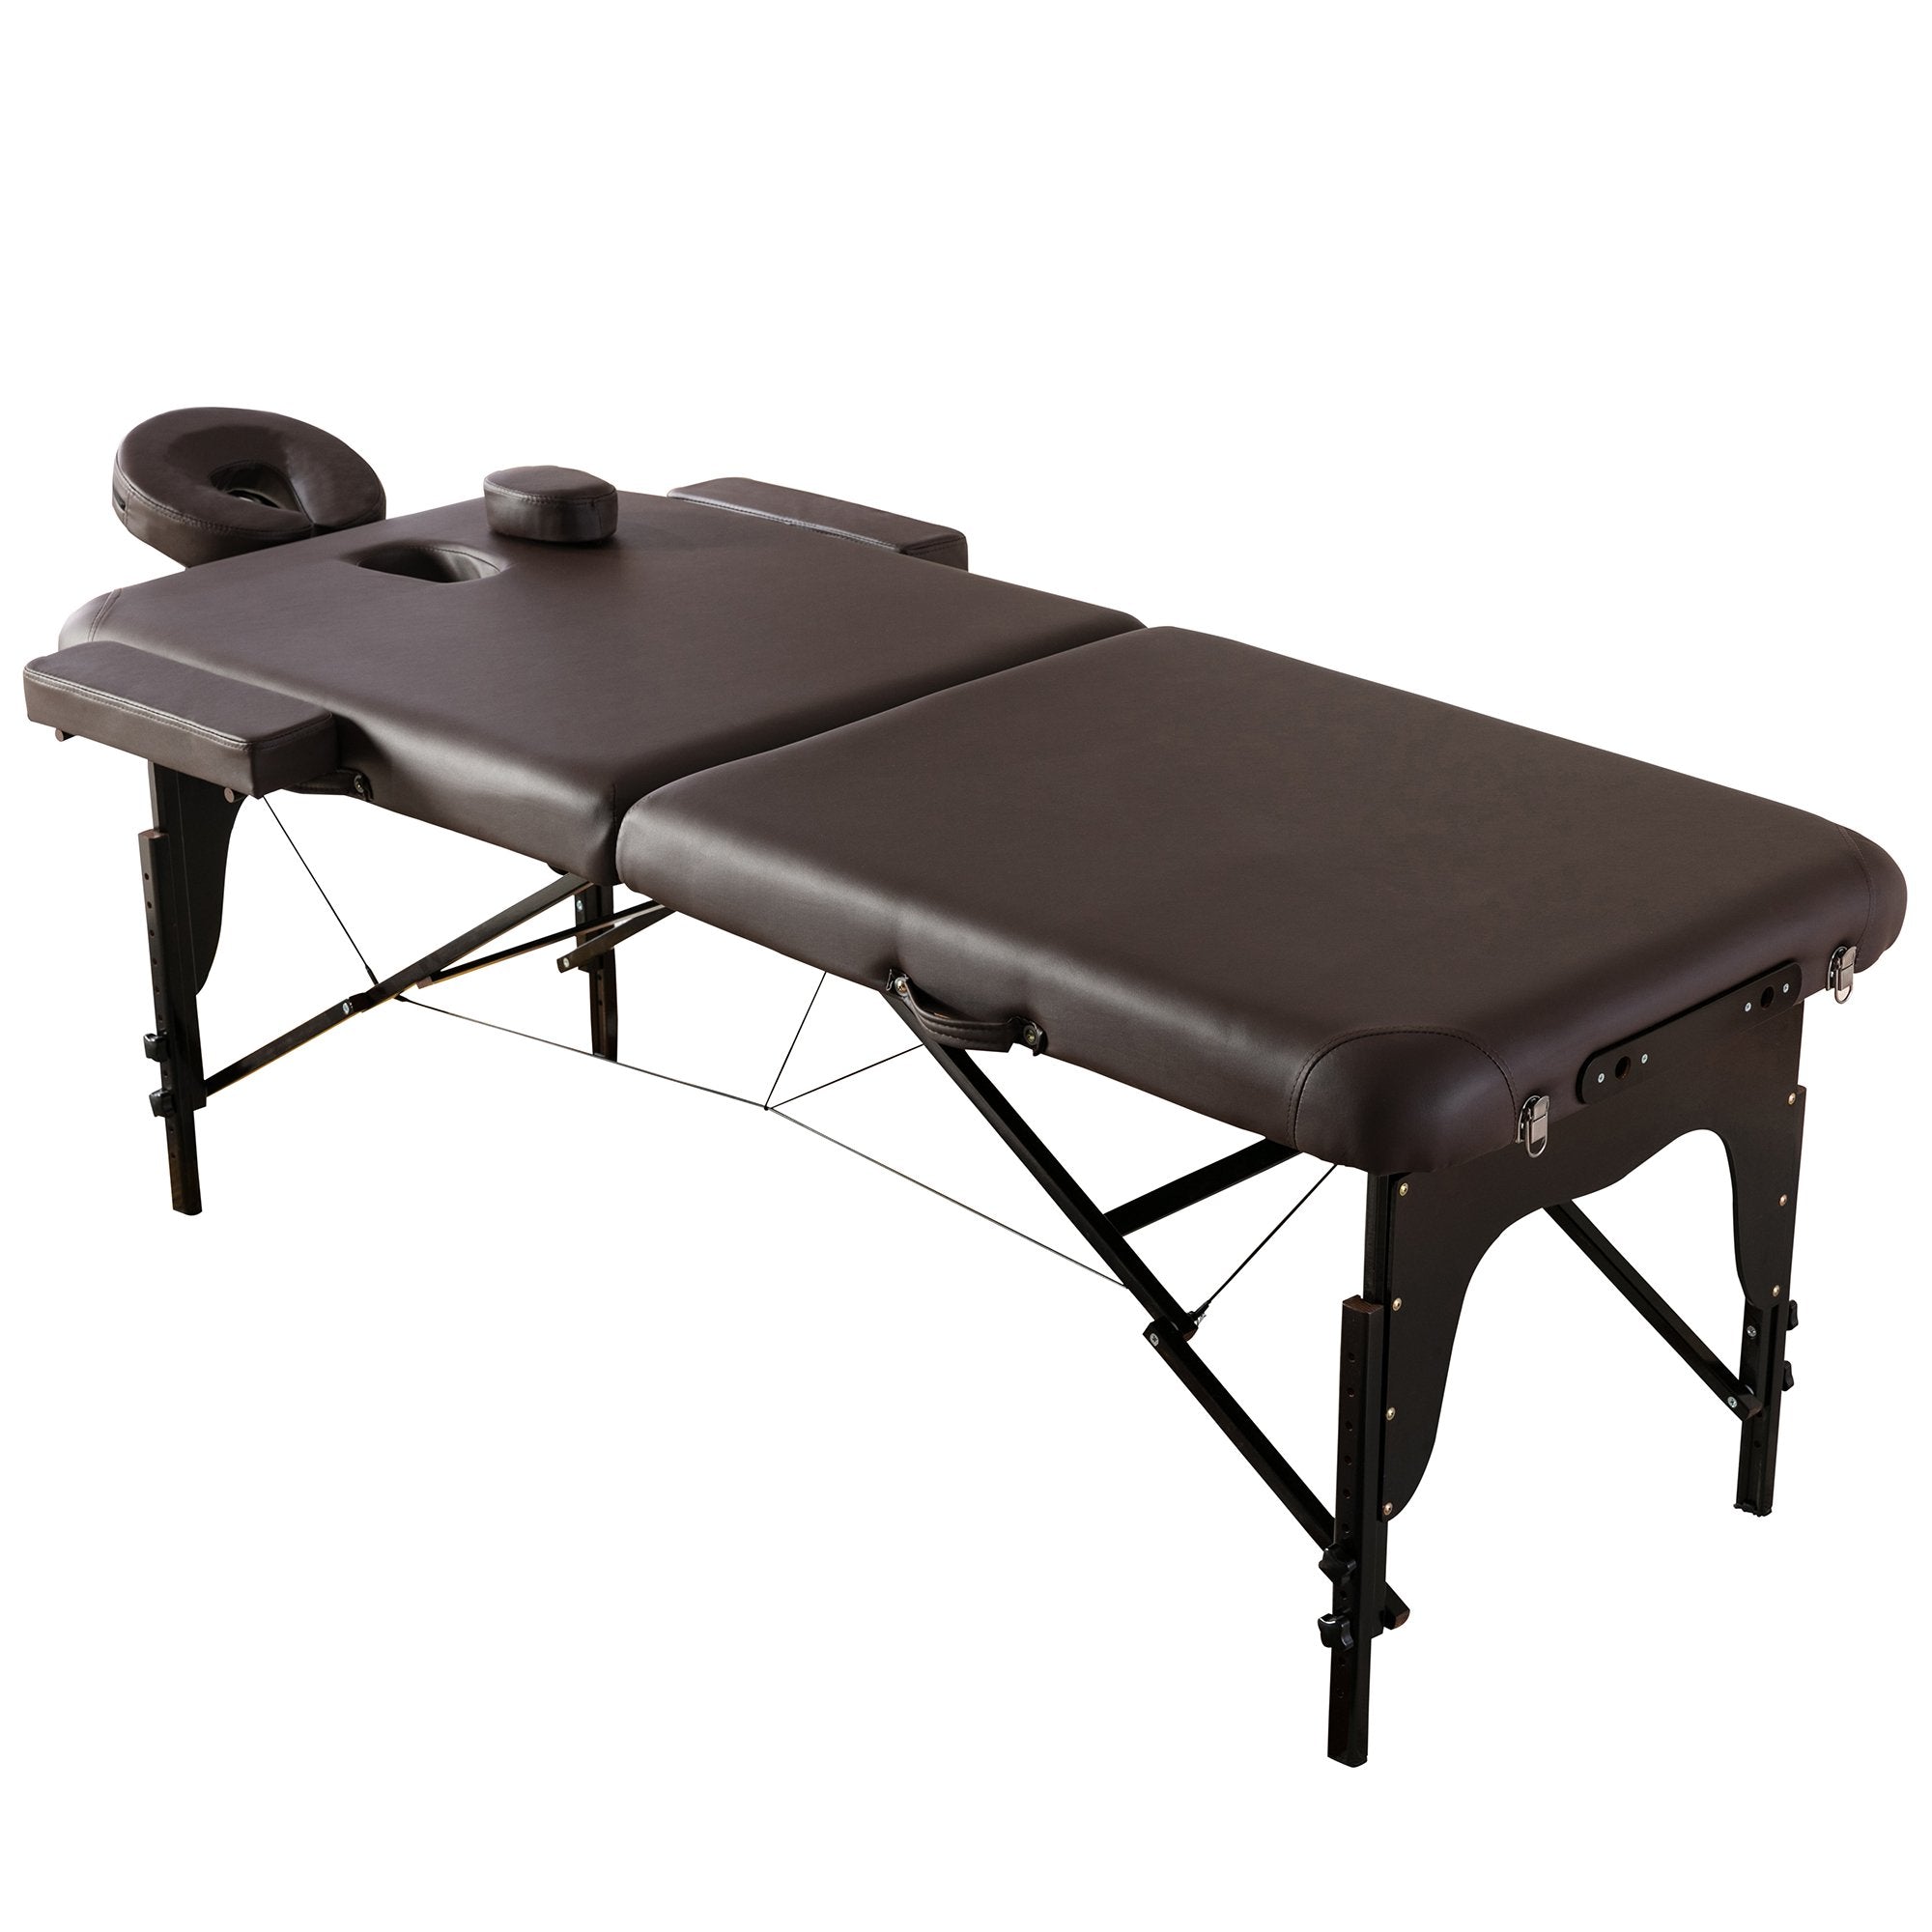 Portable Massage table, 2 Section Wooden Adjustable Folding Massage Table, PU leather  Spa  Bed-Boyel Living